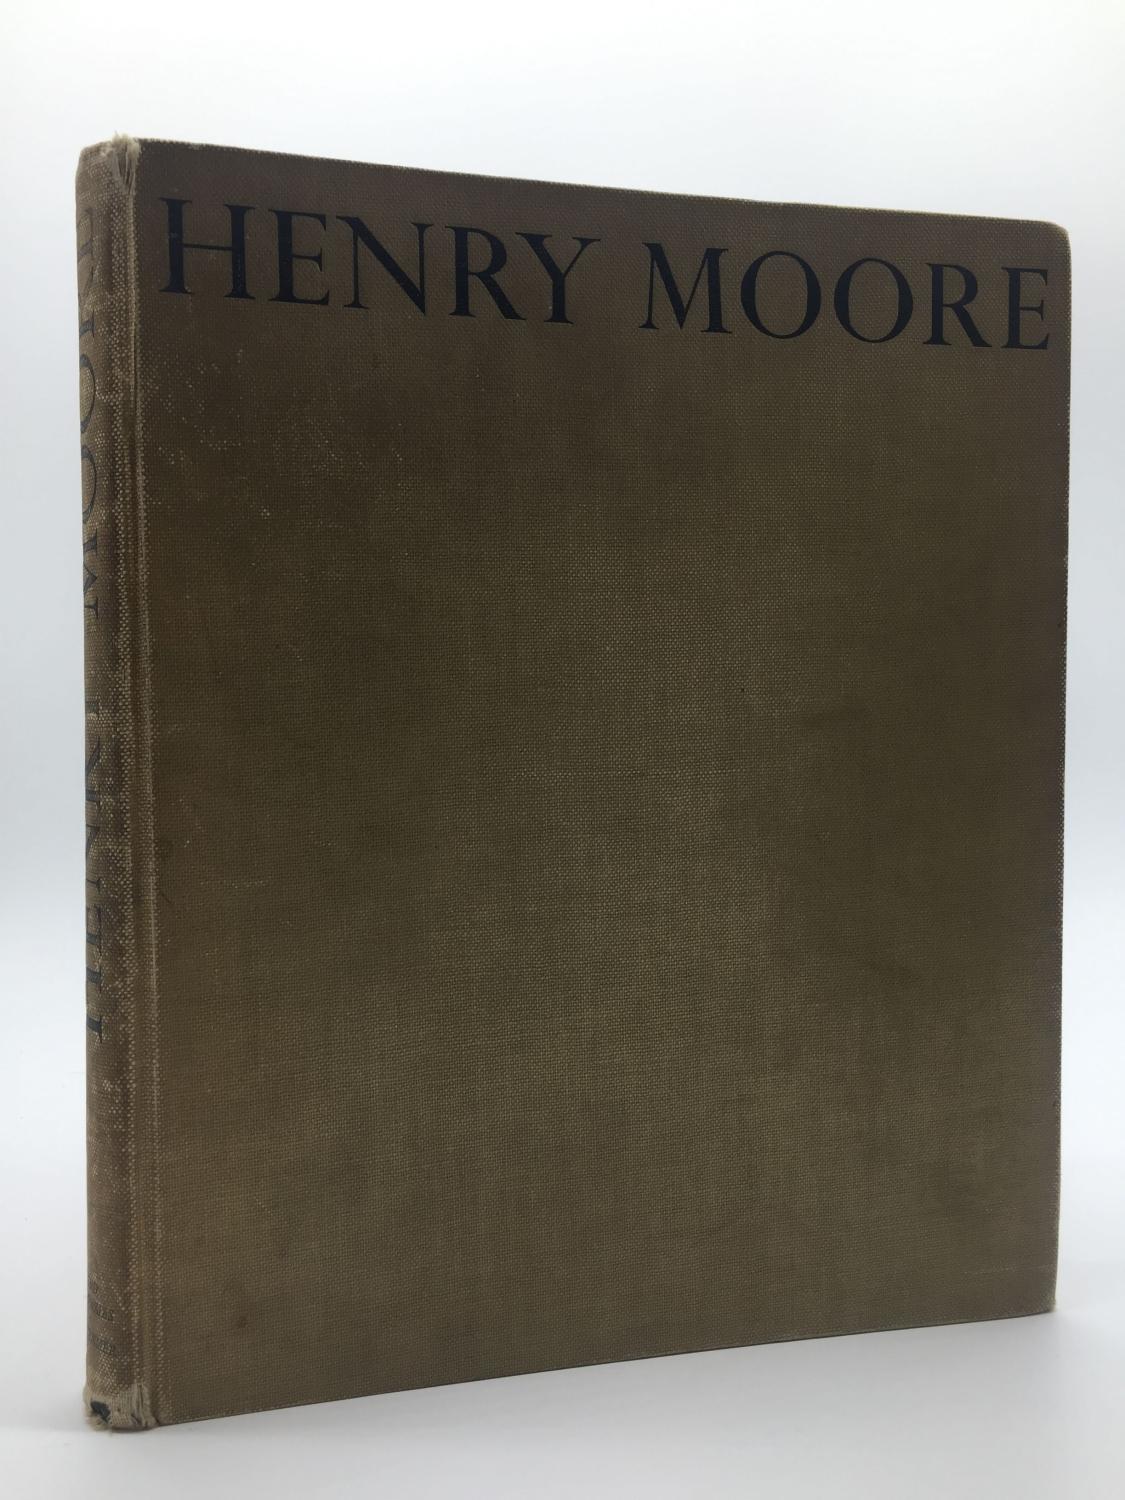 Henry Moore Sculpture And Drawings Very Good Hardcover 1944 First Edition Signed By Author